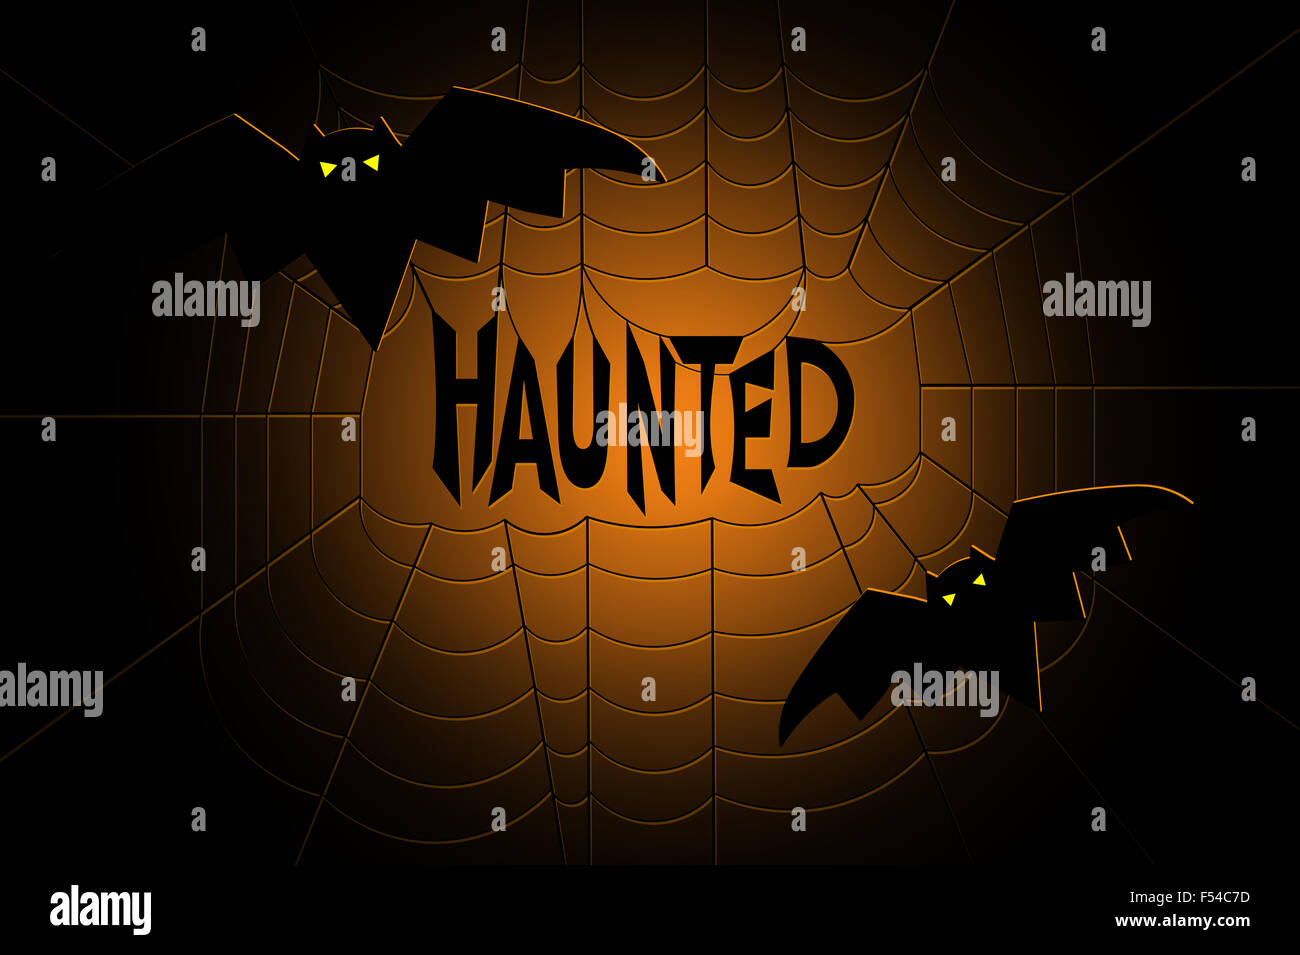 Haunted -text hanging in the middle of a spider web, with spooky bats flying, back lit with orange glow Stock Photo